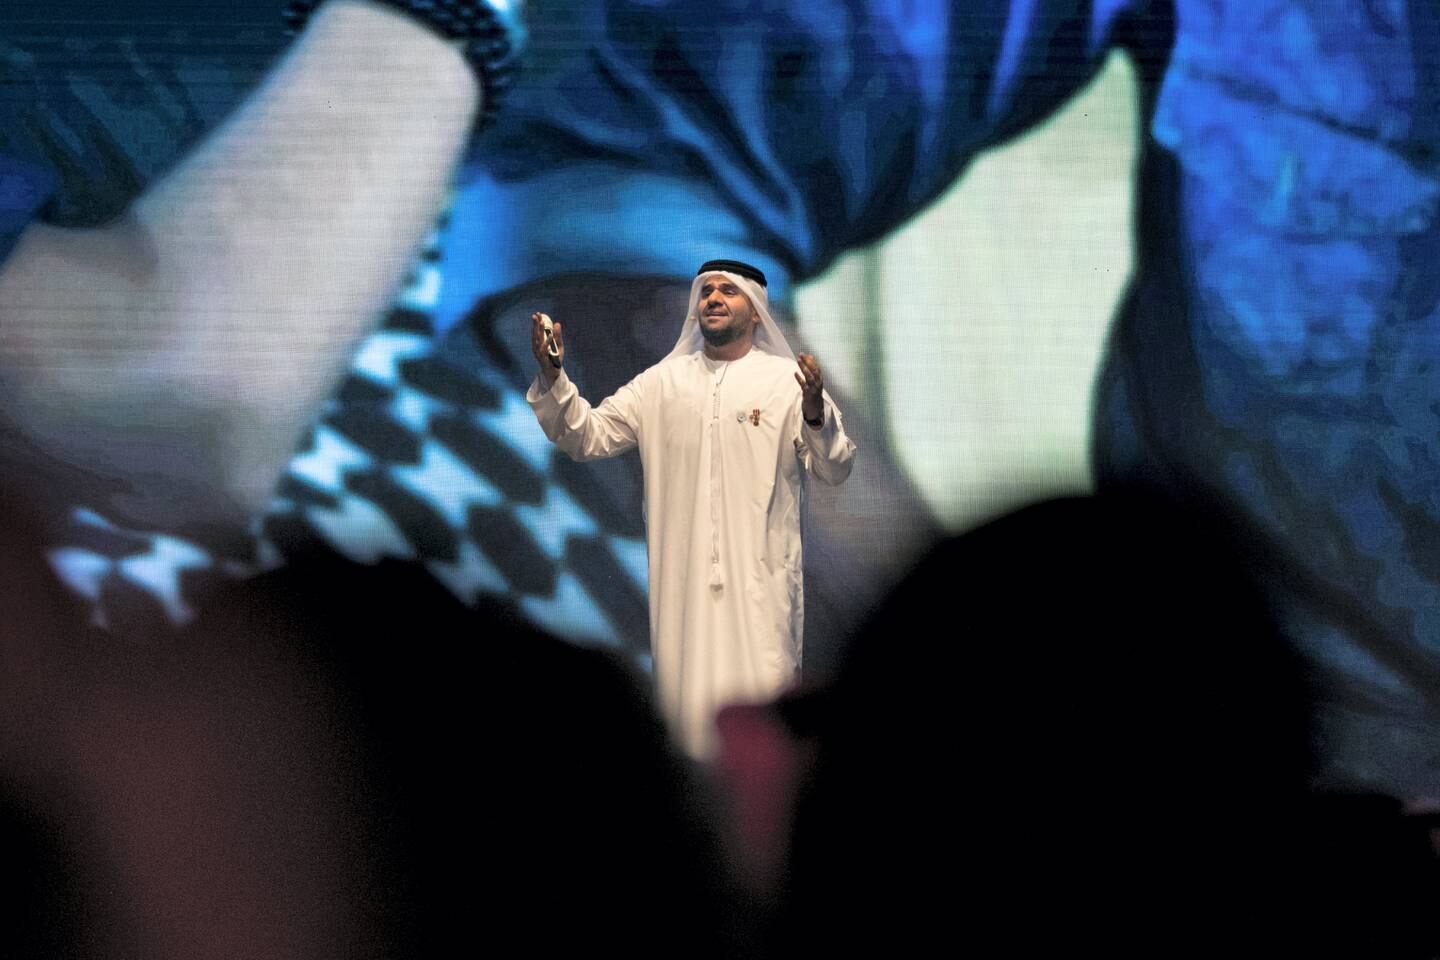 DUBAI, UNITED ARAB EMIRATES - MAY 14, 2018. 

Hussain Al Jasmi performs at the Arab Hope Makers award.

Arab Hope Makers Award is  in its second year. The award was launched by Sheikh Mohammed bin Rashid in 2017. It seeks out inspirational stories from across the world and is presented to an individual in recognition of their "heroic" good deeds. 
The committee received more than 87,000 entries this year.

(Photo by Reem Mohammed/The National)

Reporter: Nawal
Section: NA